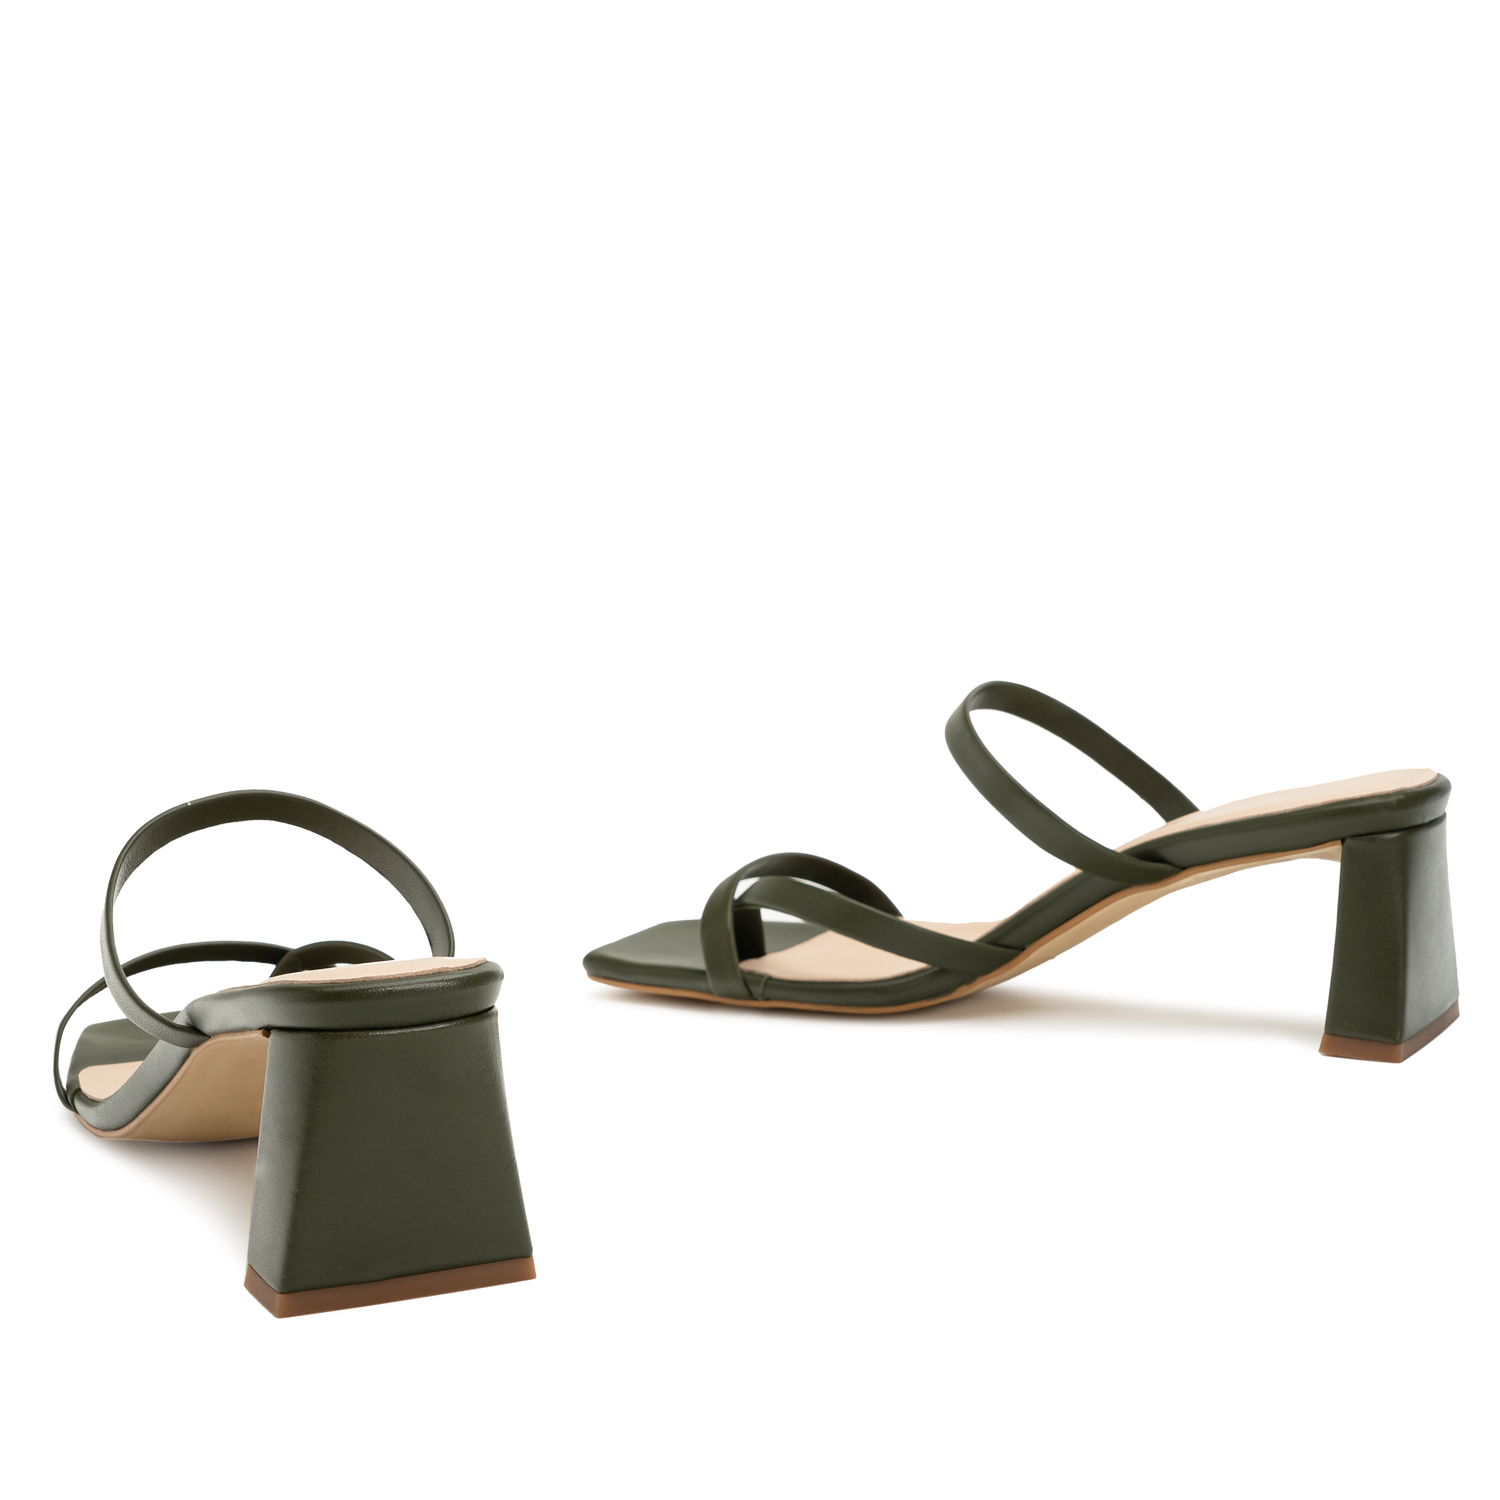 Heeled Mules in Kaki Leather with Square Toe 